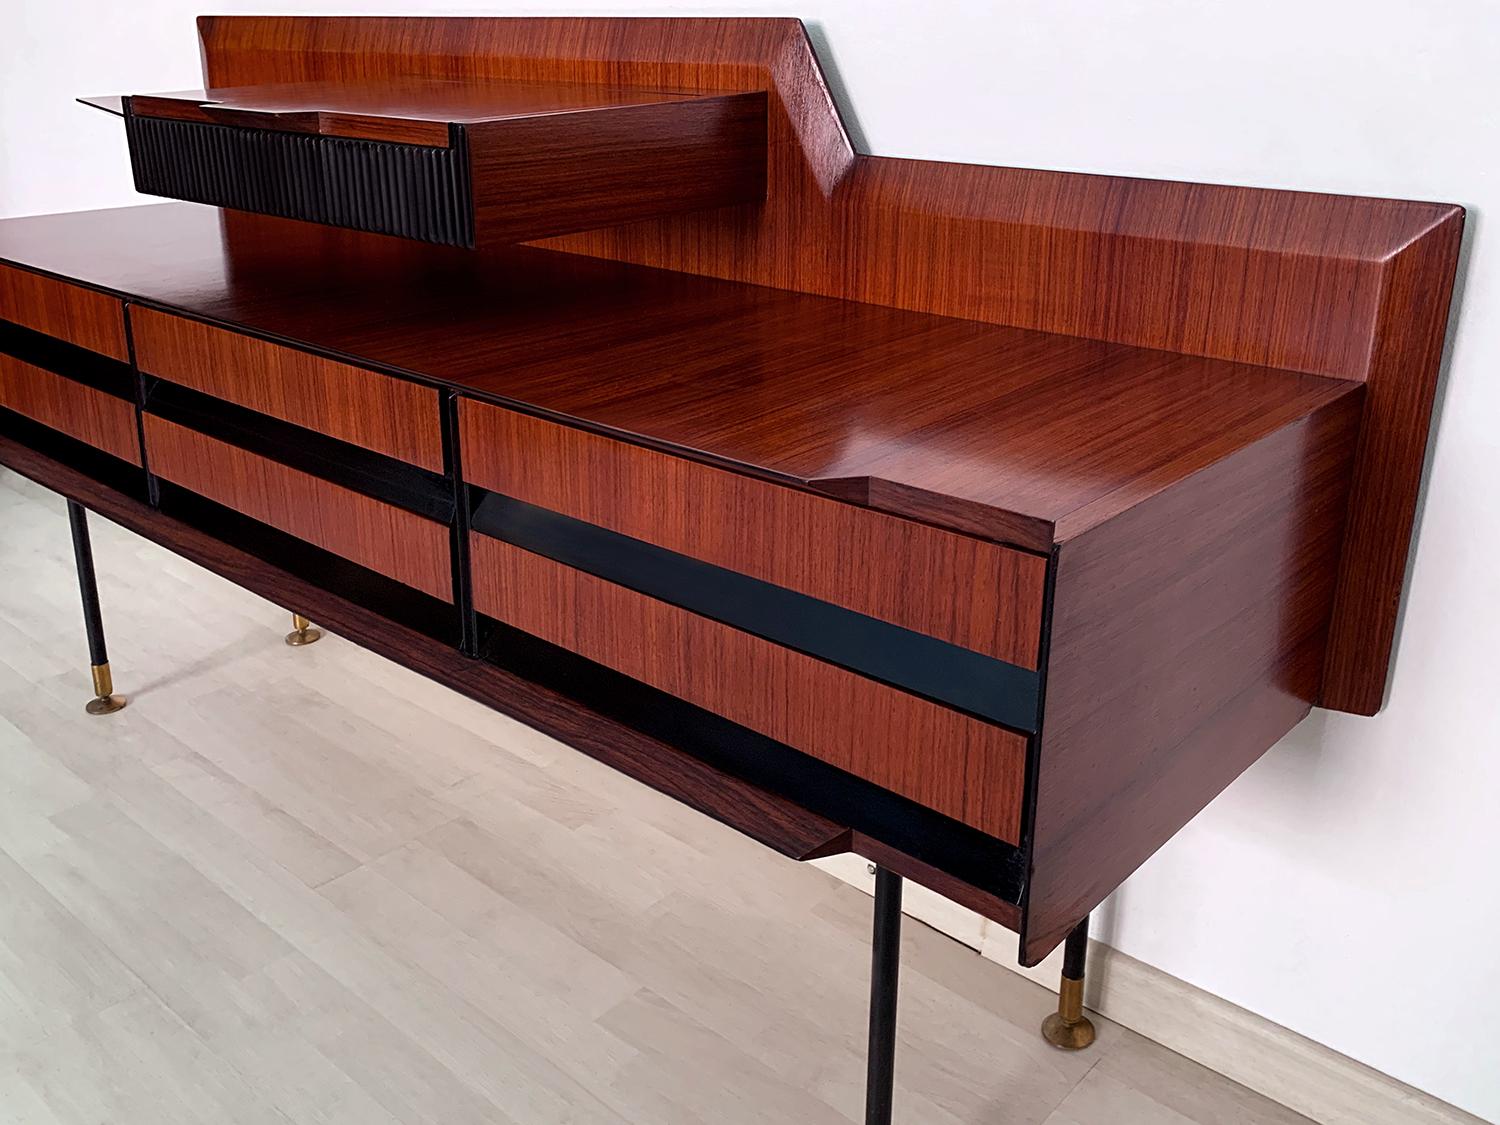 20th Century Italian Mid-Century Teak Wood Sideboard with Drawers by Vittorio Dassi, 1950s